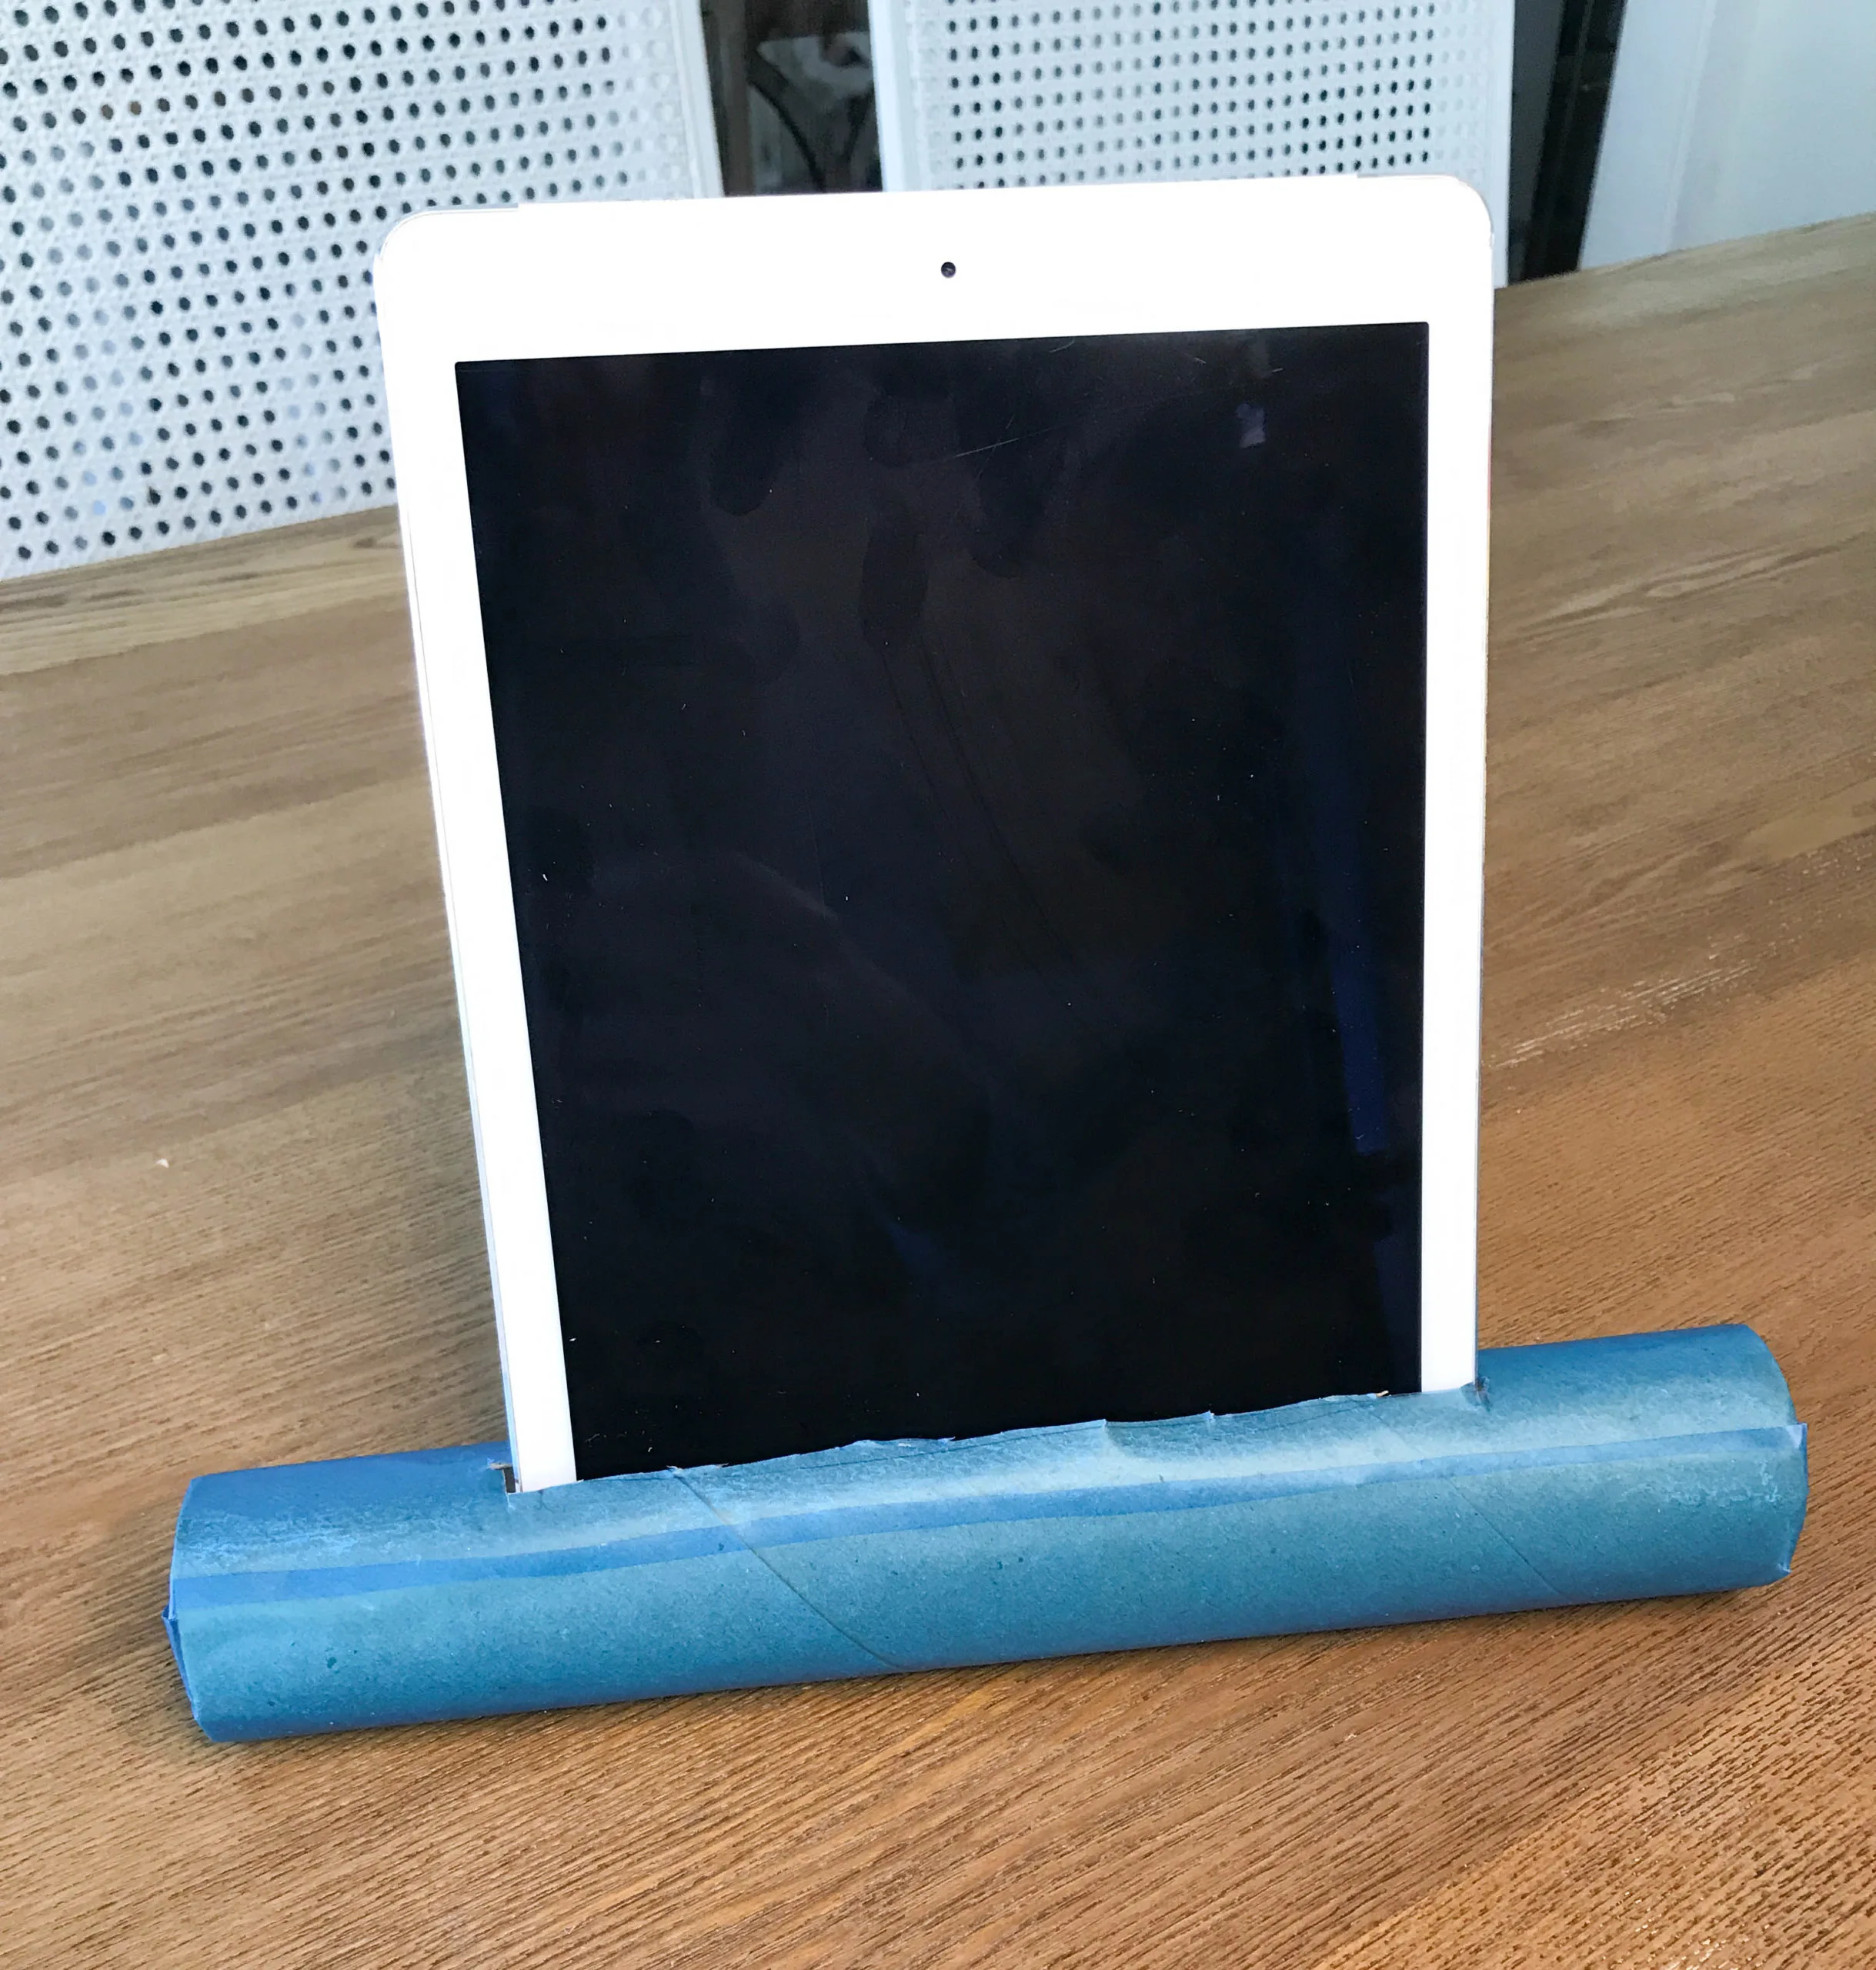 DIY Tablet Stand from a Paper Towel Roll Tube